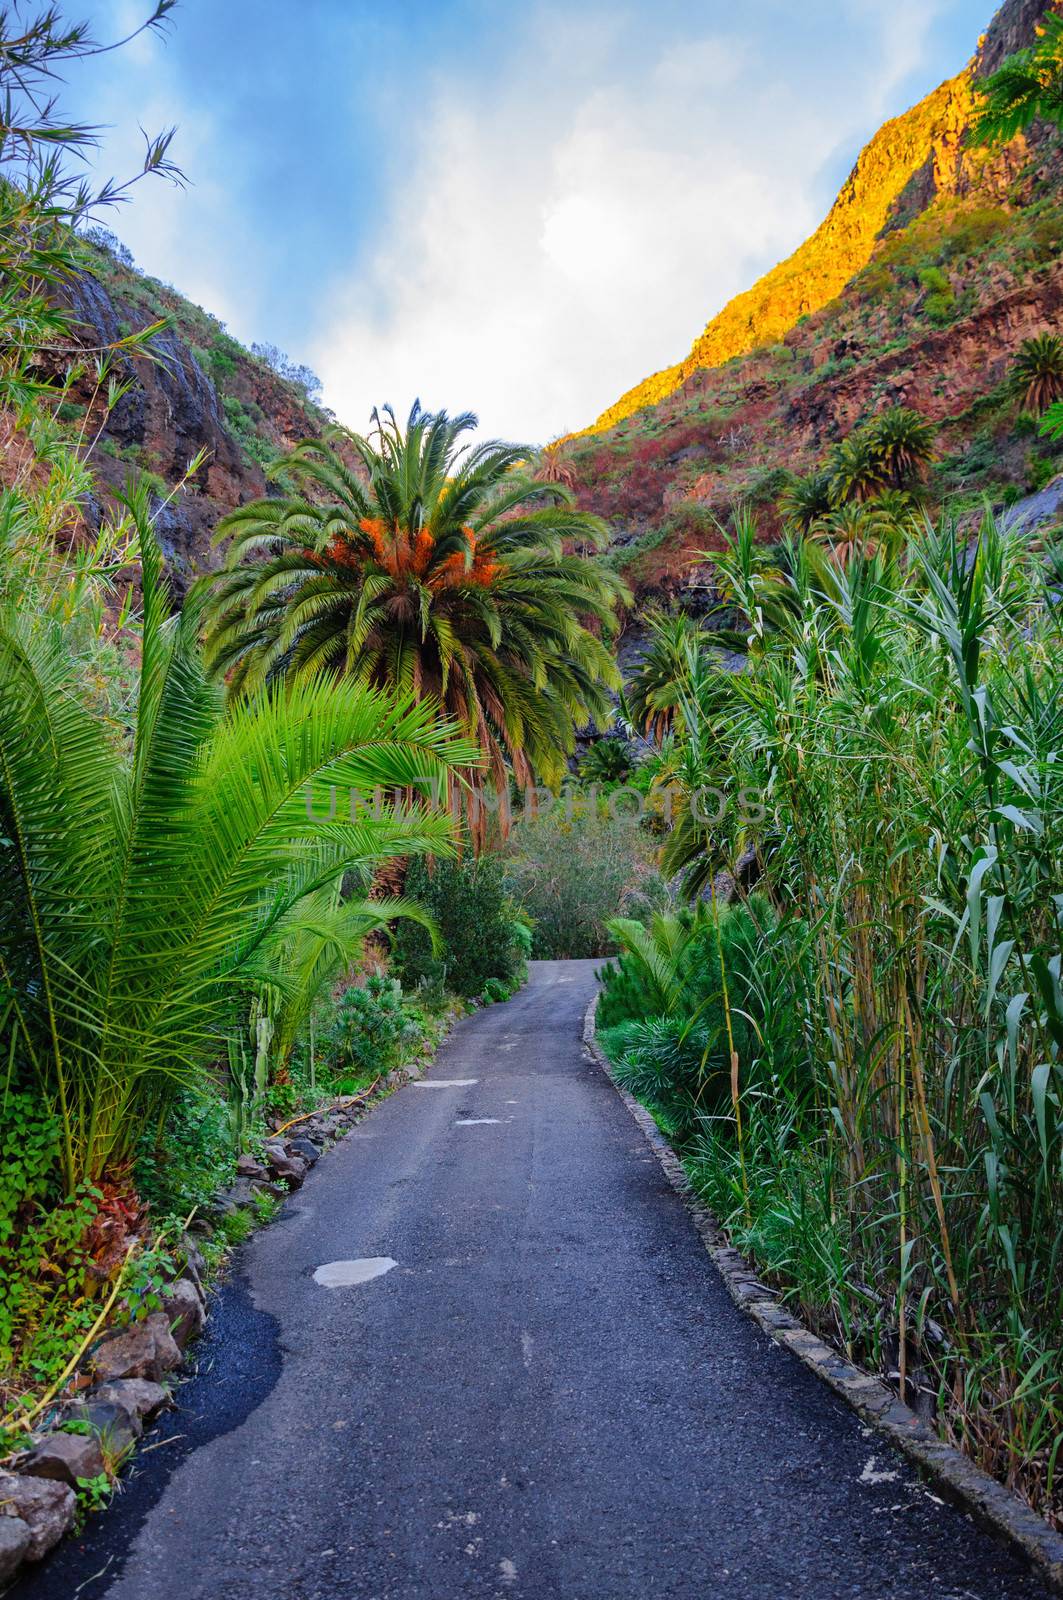 Palms with a road near Masca village with mountains, Tenerife, C by Eagle2308